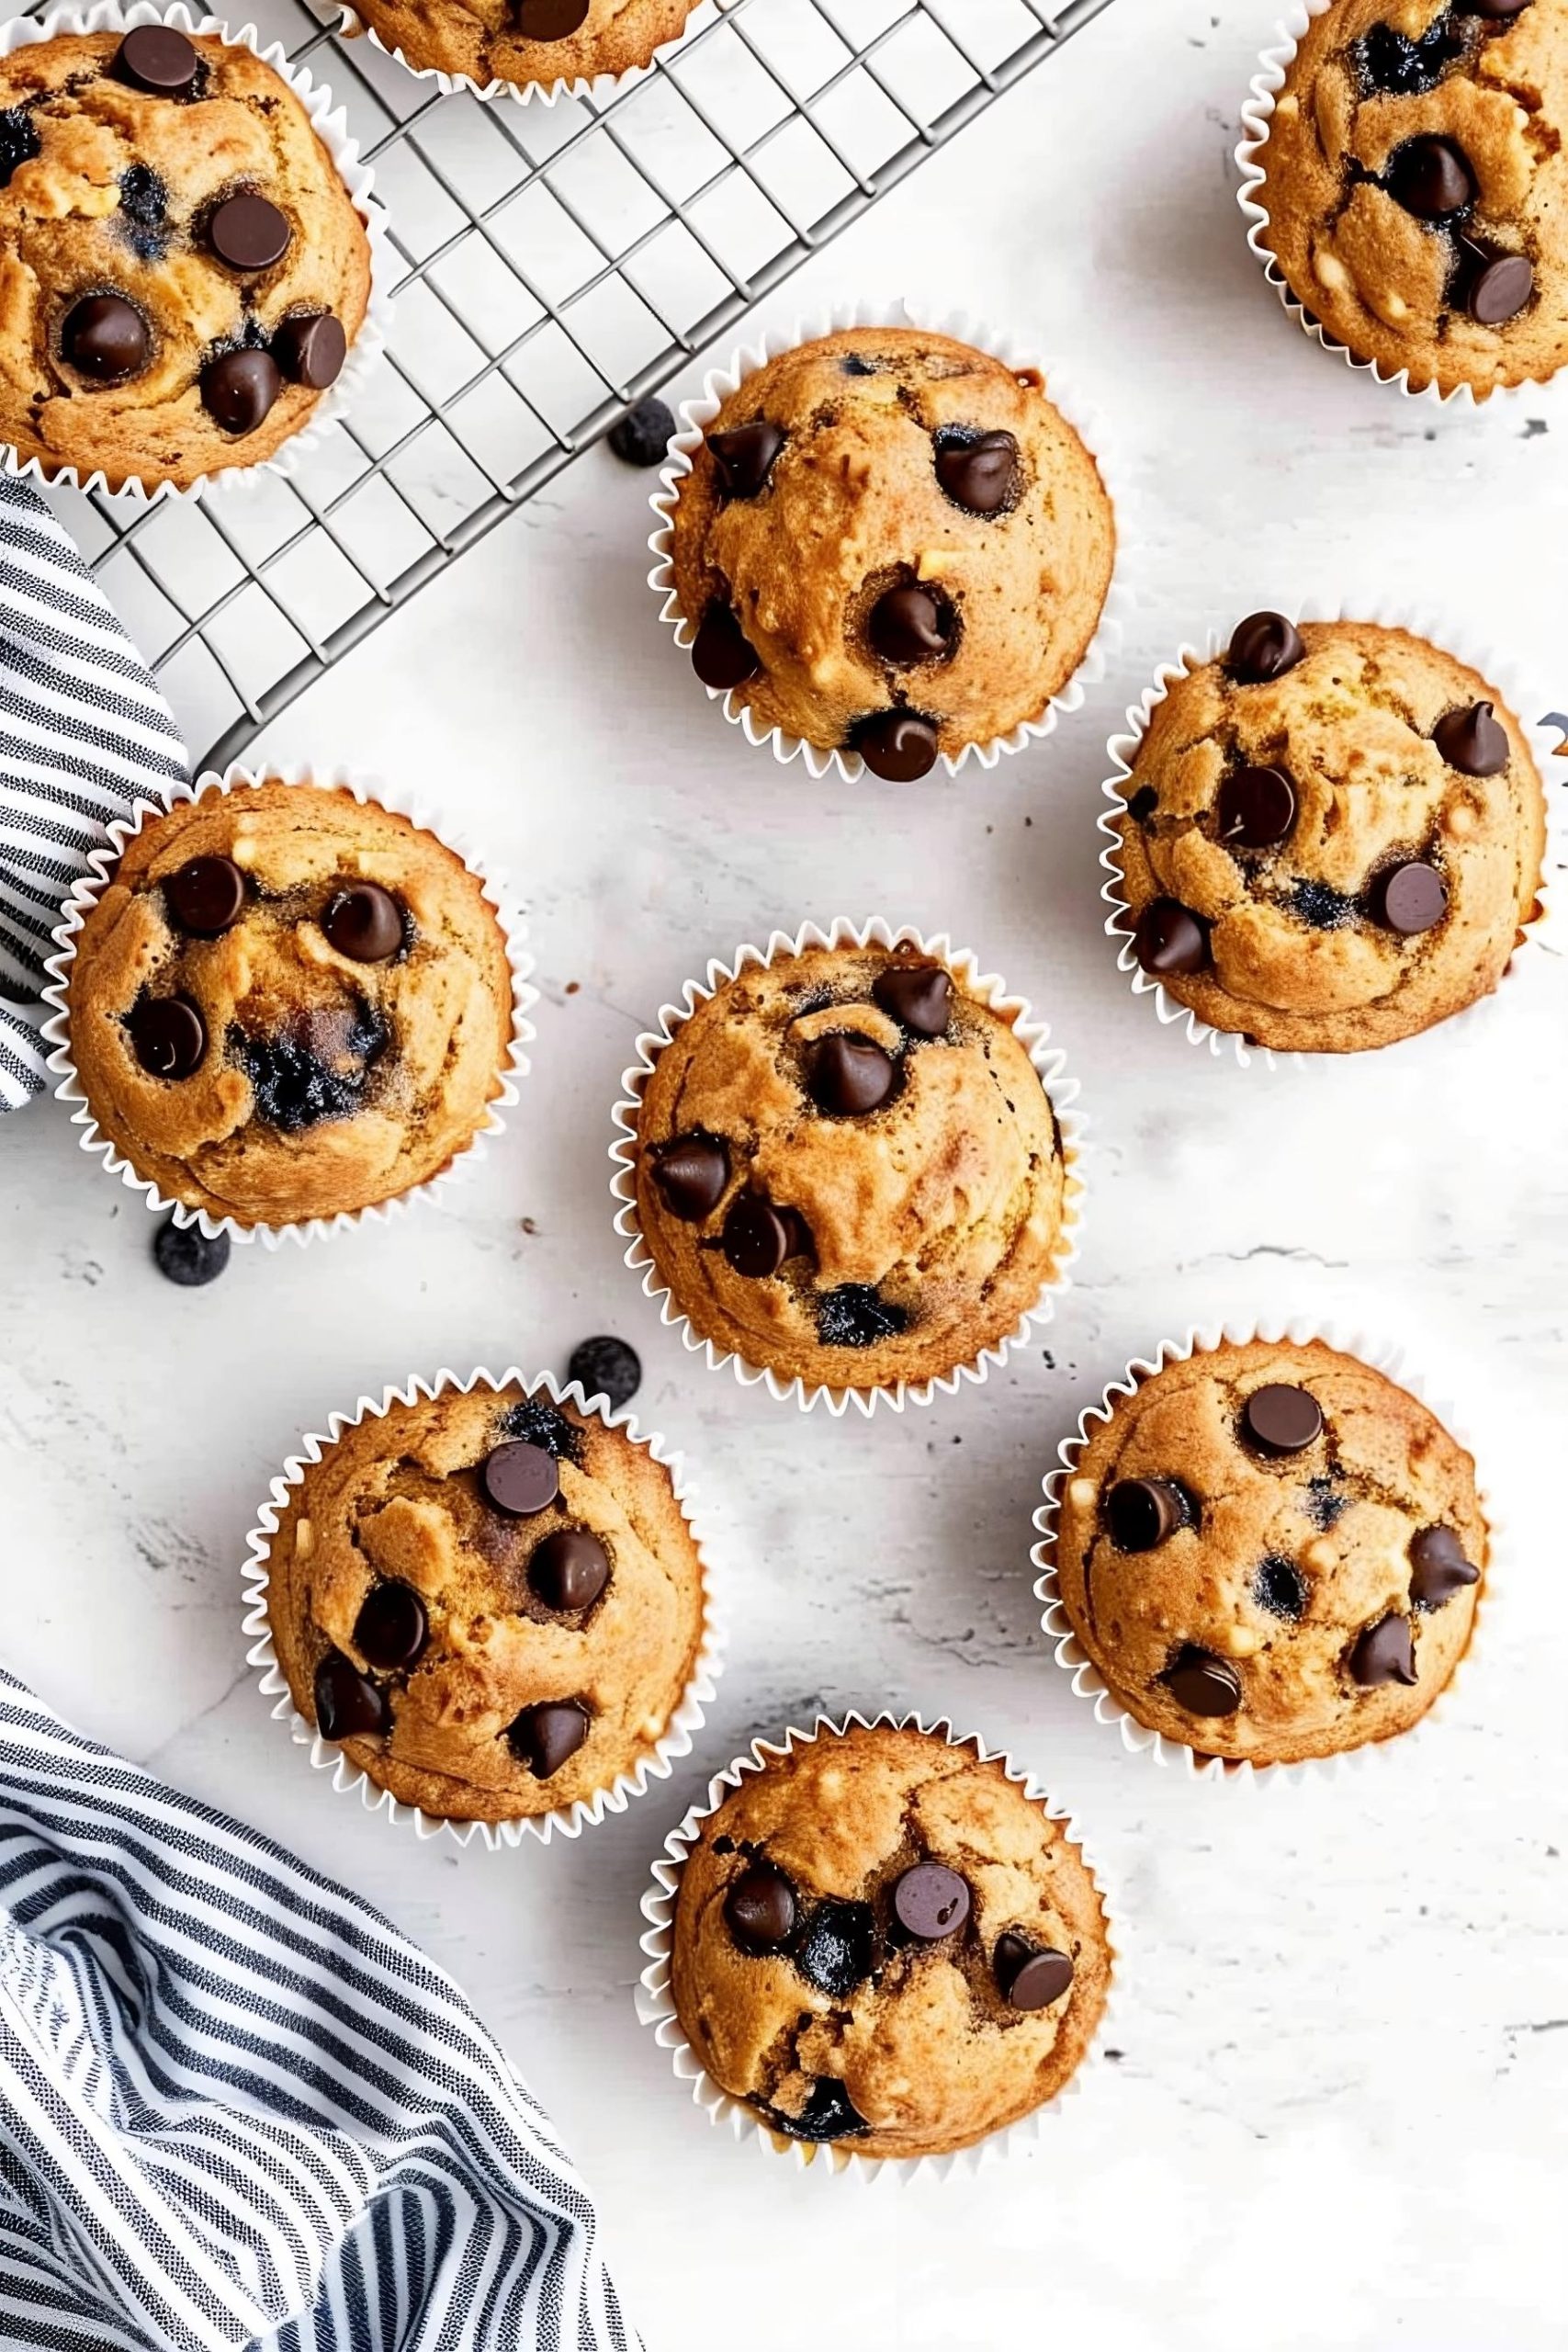 Kodiak muffins with chocolate chips, filled with blueberries